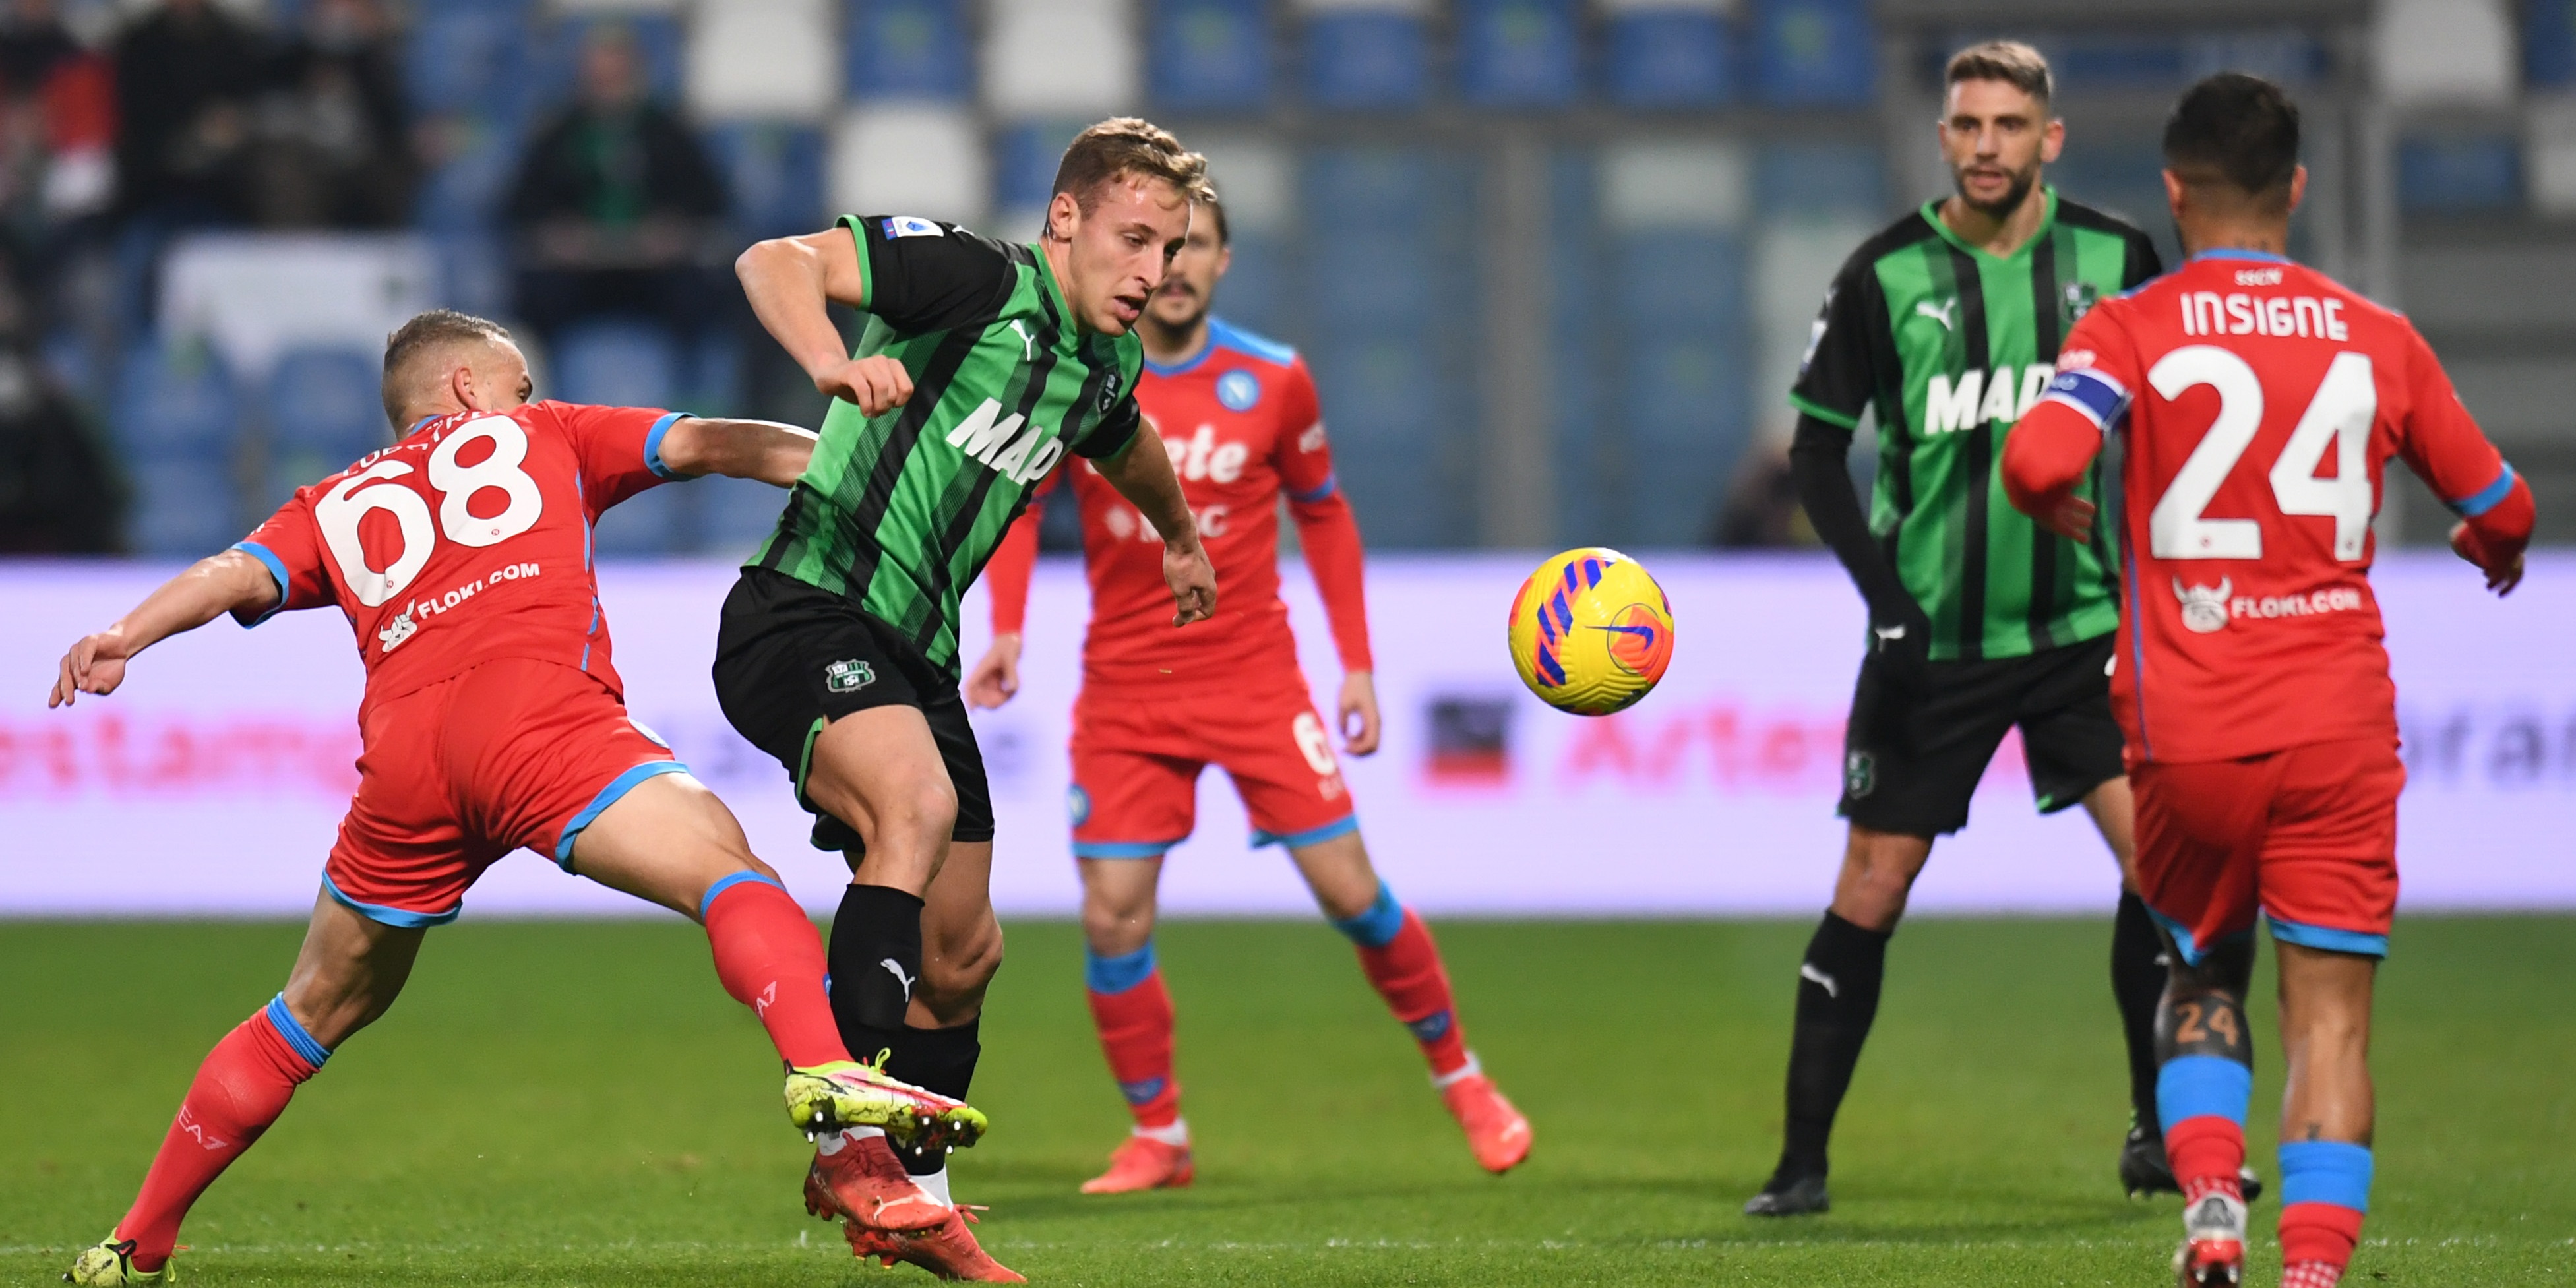 Exclusive: Fabrizio Romano opens up on ‘super talented’ Serie A star who ‘reminds me’ of ex-Liverpool target Nicolo Barella